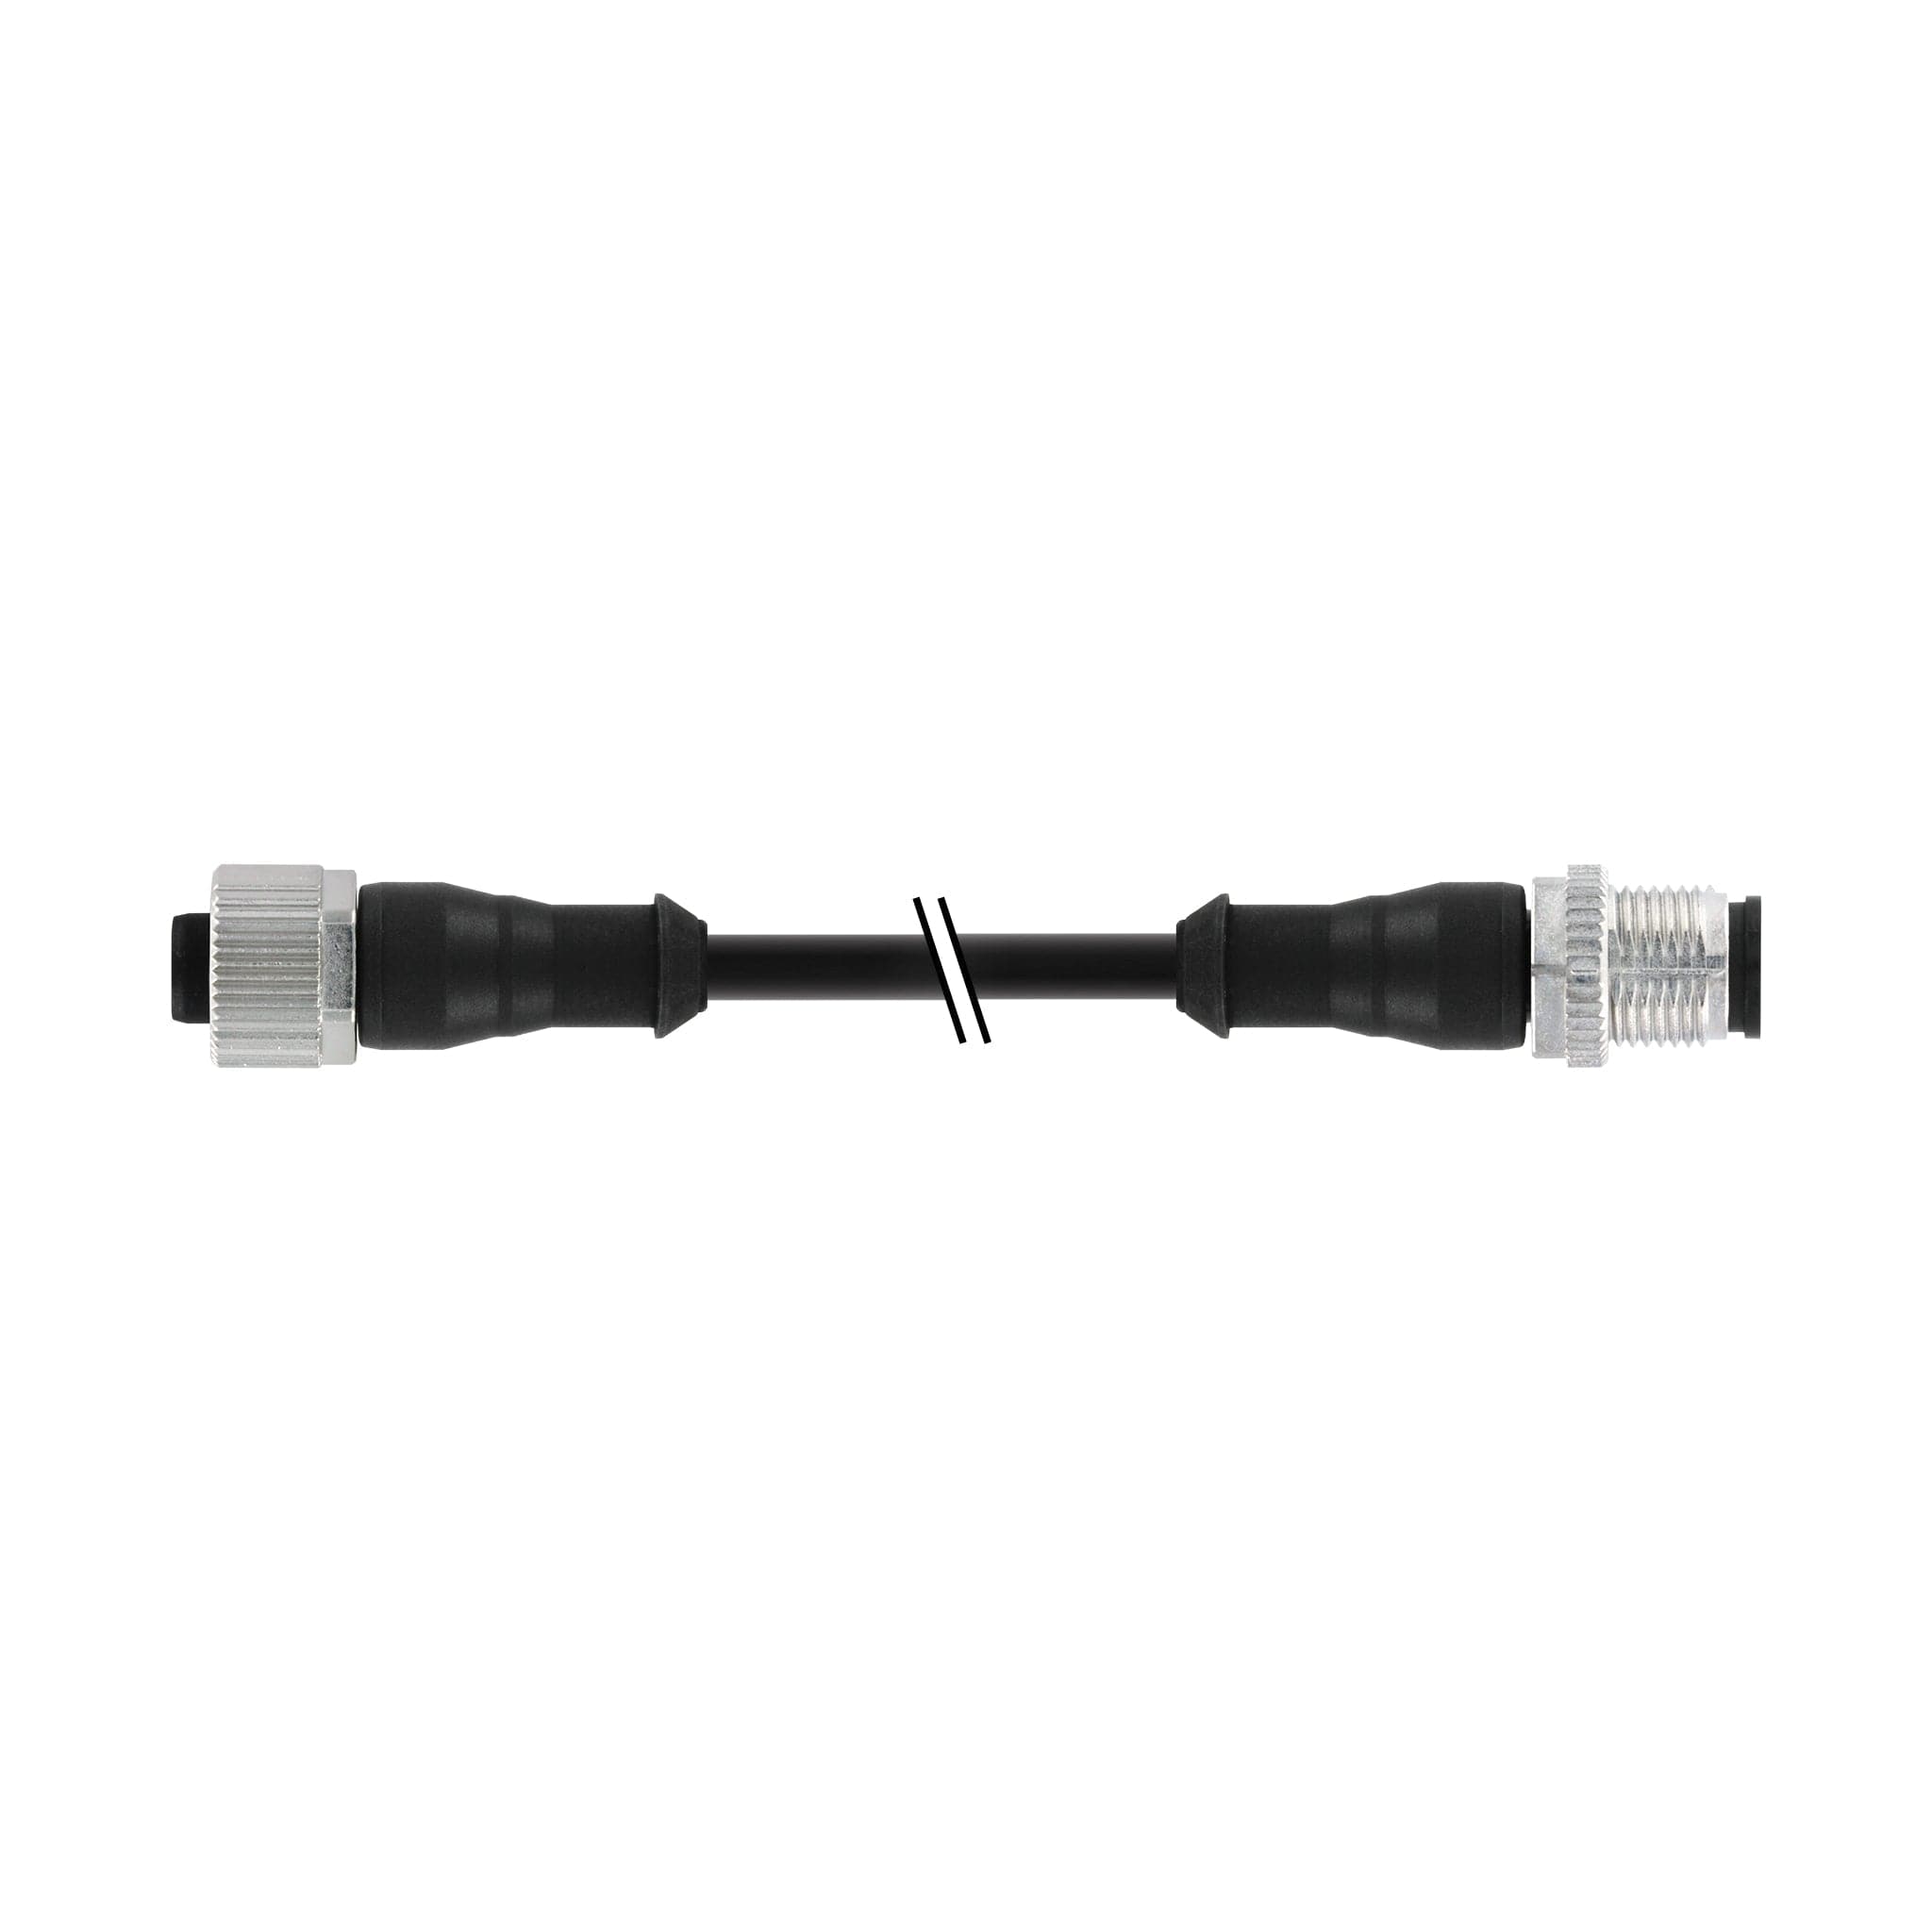 Connection cables weld immune M12+M12 Straight Straight SOCKET + PLUG 3 wires 0.34 mm2 NO LED